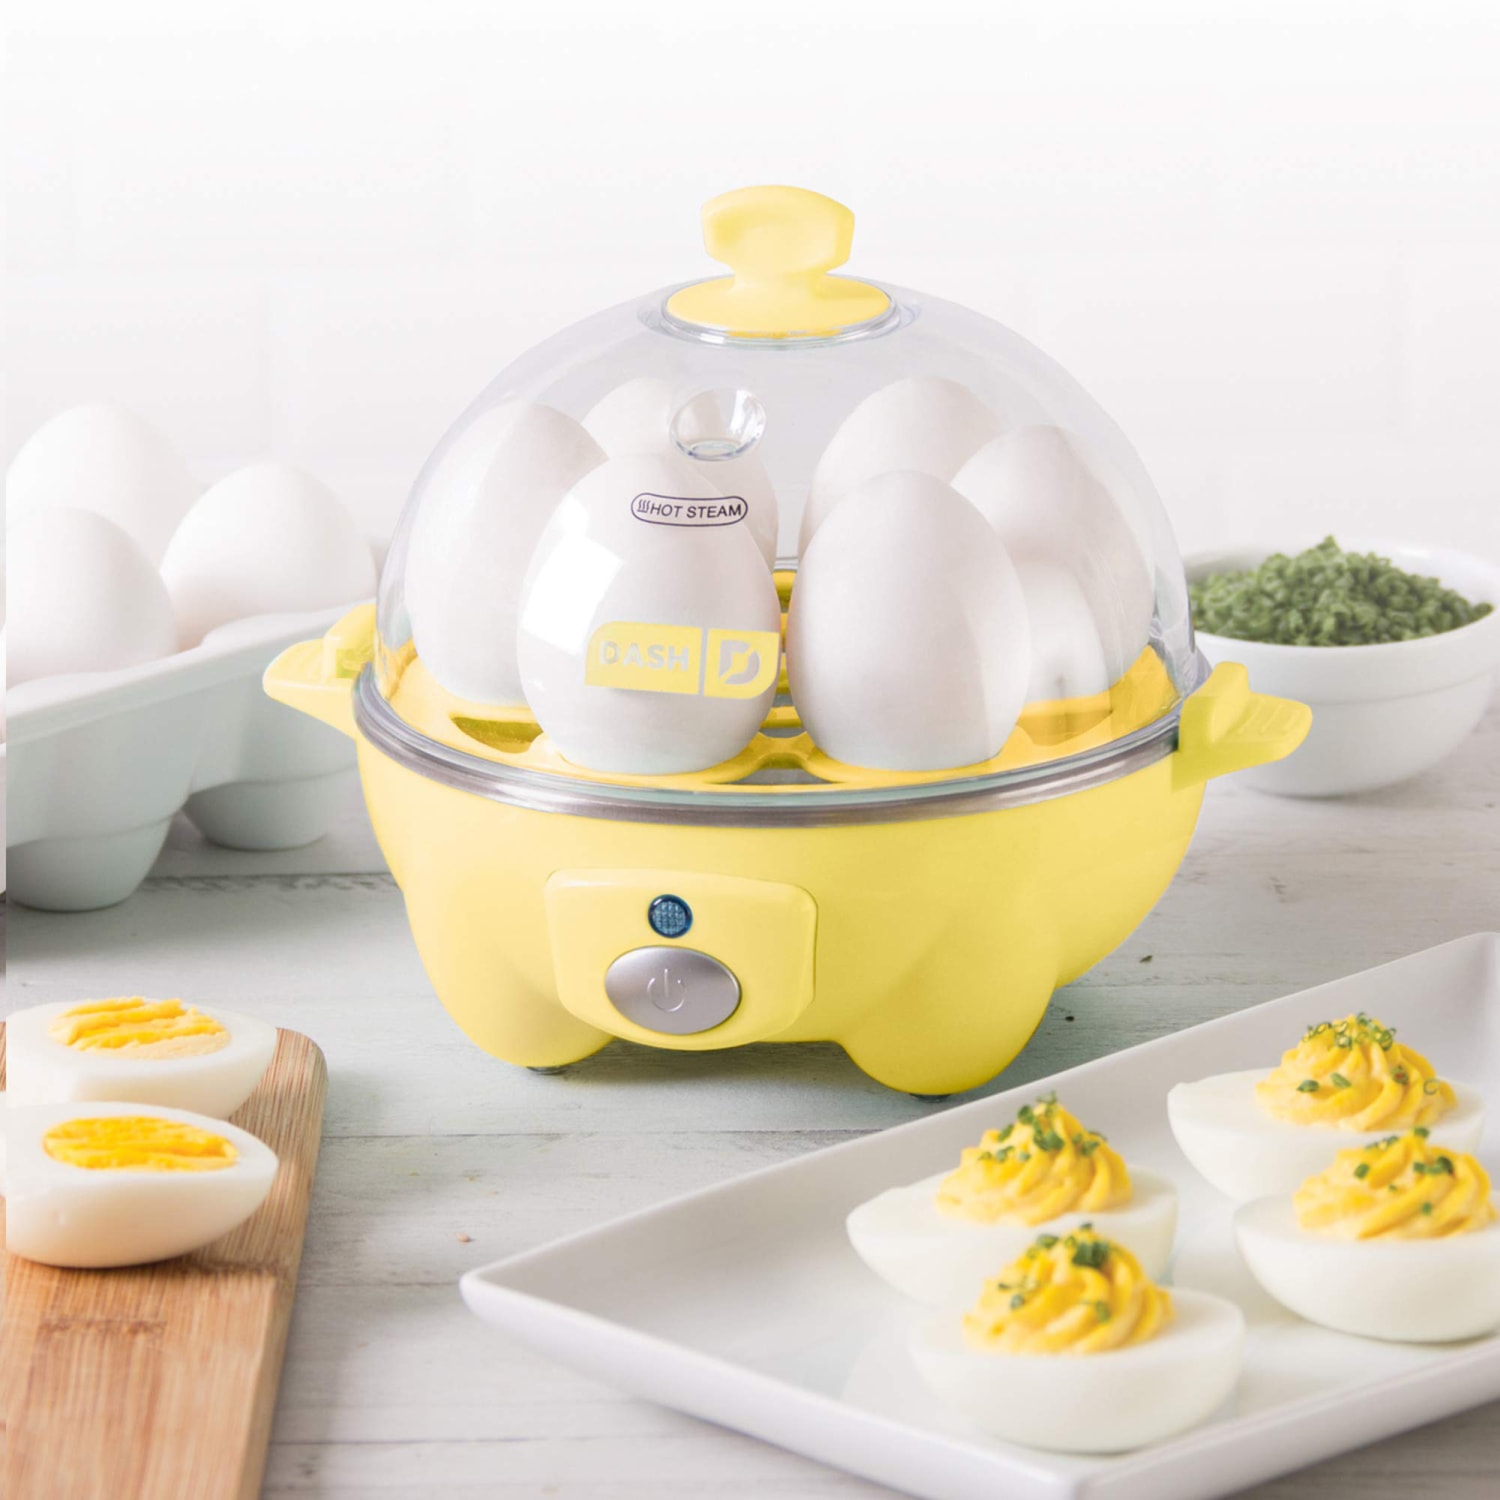 https://media-cldnry.s-nbcnews.com/image/upload/t_fit-1500w,f_auto,q_auto:best/newscms/2019_50/1517614/rapid-egg-cooker-today-square-191209.jpg